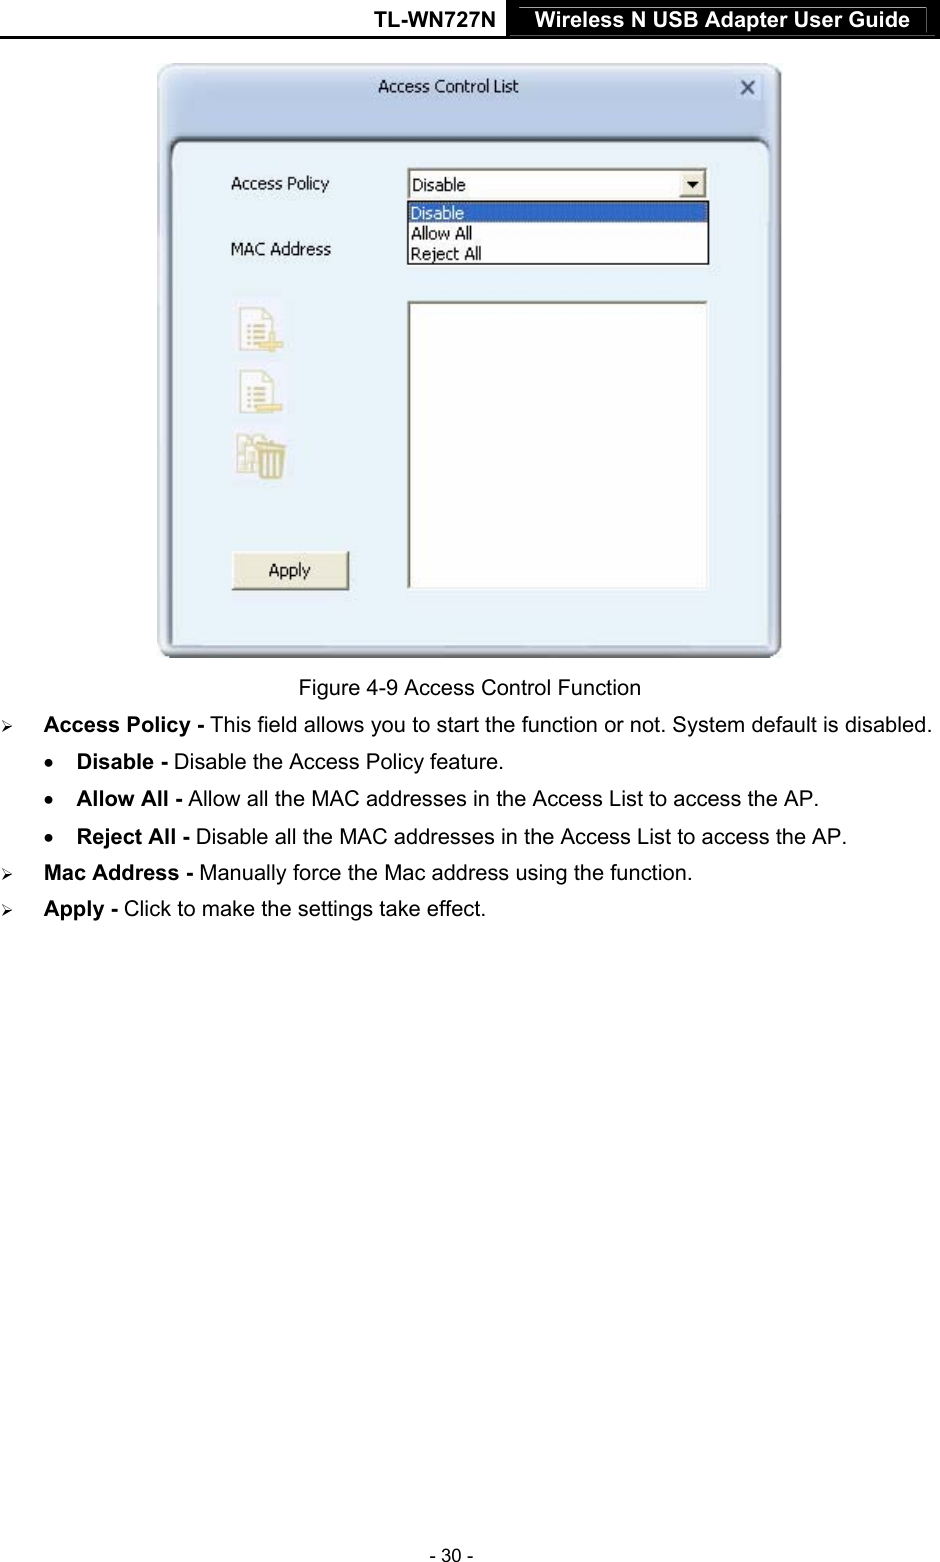 TL-WN727N Wireless N USB Adapter User Guide  - 30 -  Figure 4-9 Access Control Function ¾ Access Policy - This field allows you to start the function or not. System default is disabled. • Disable - Disable the Access Policy feature. • Allow All - Allow all the MAC addresses in the Access List to access the AP. • Reject All - Disable all the MAC addresses in the Access List to access the AP. ¾ Mac Address - Manually force the Mac address using the function. ¾ Apply - Click to make the settings take effect. 